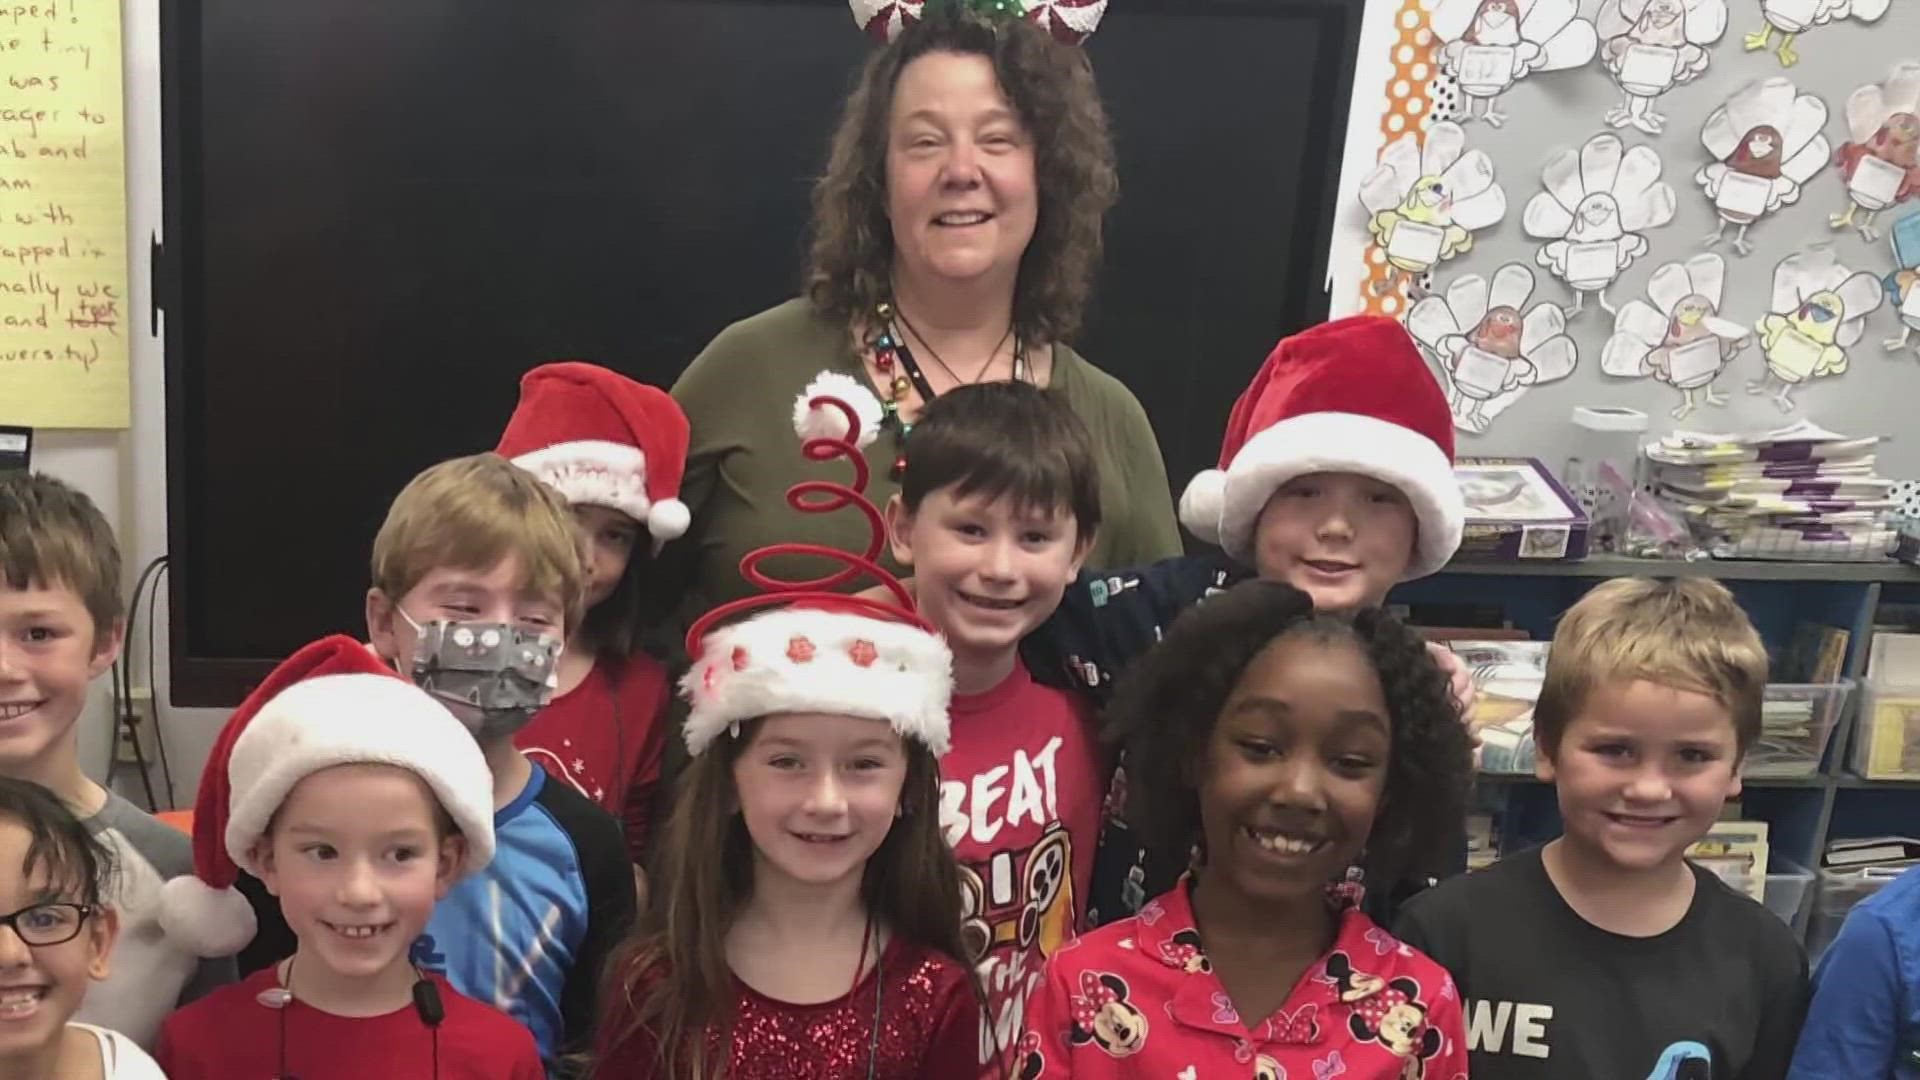 Last week, teacher Aimee Dixon died days after a head-on car crash. Now, her coworkers are remembering the woman they said made everyone feel special.